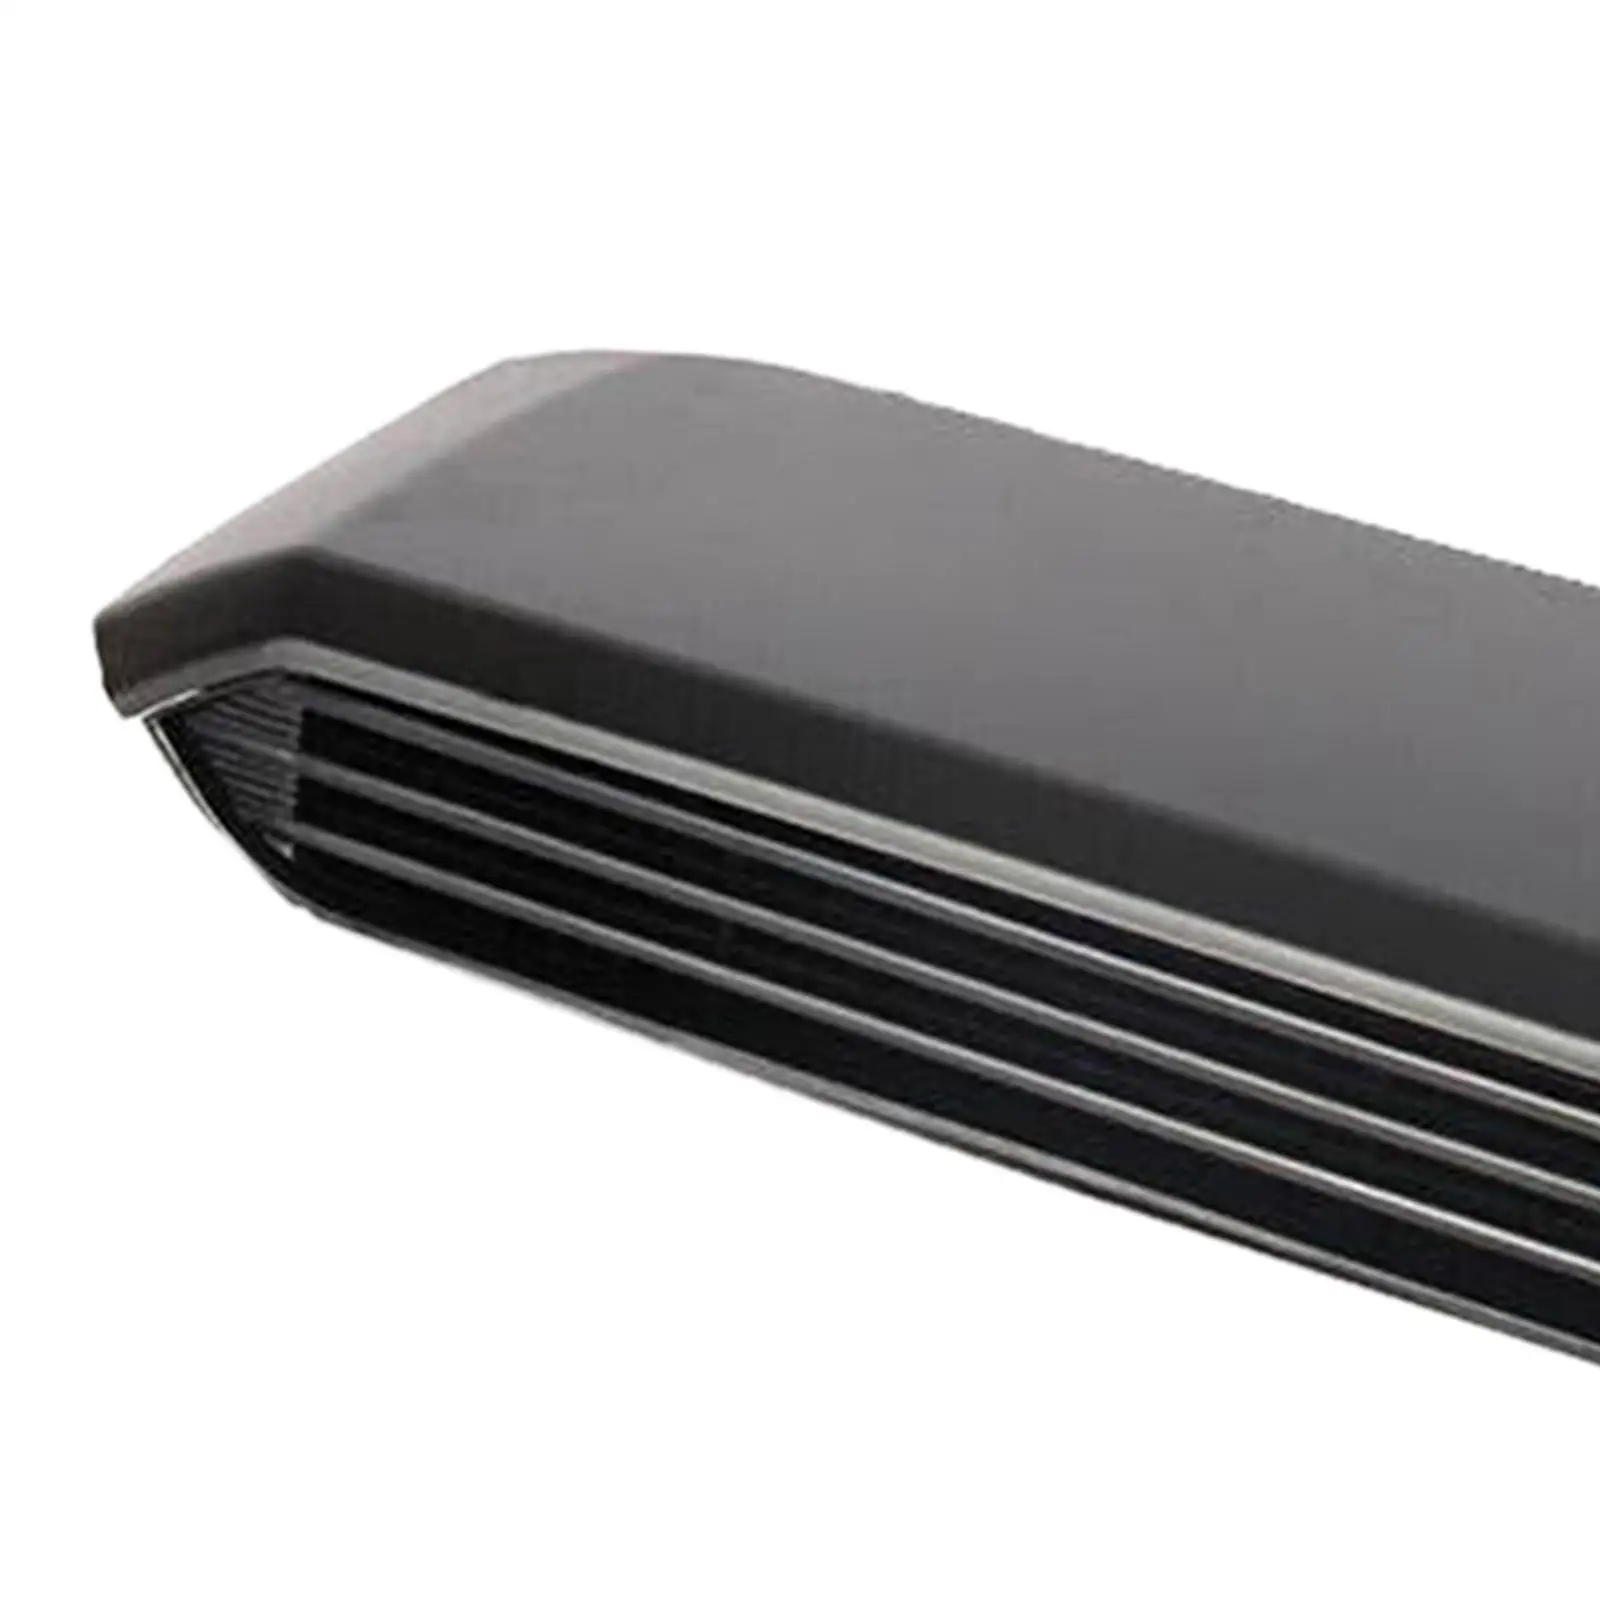 76181-04900, Hood Scoop Kit, Easy to Install, Spare Parts, Premium Car Accessories Replaces